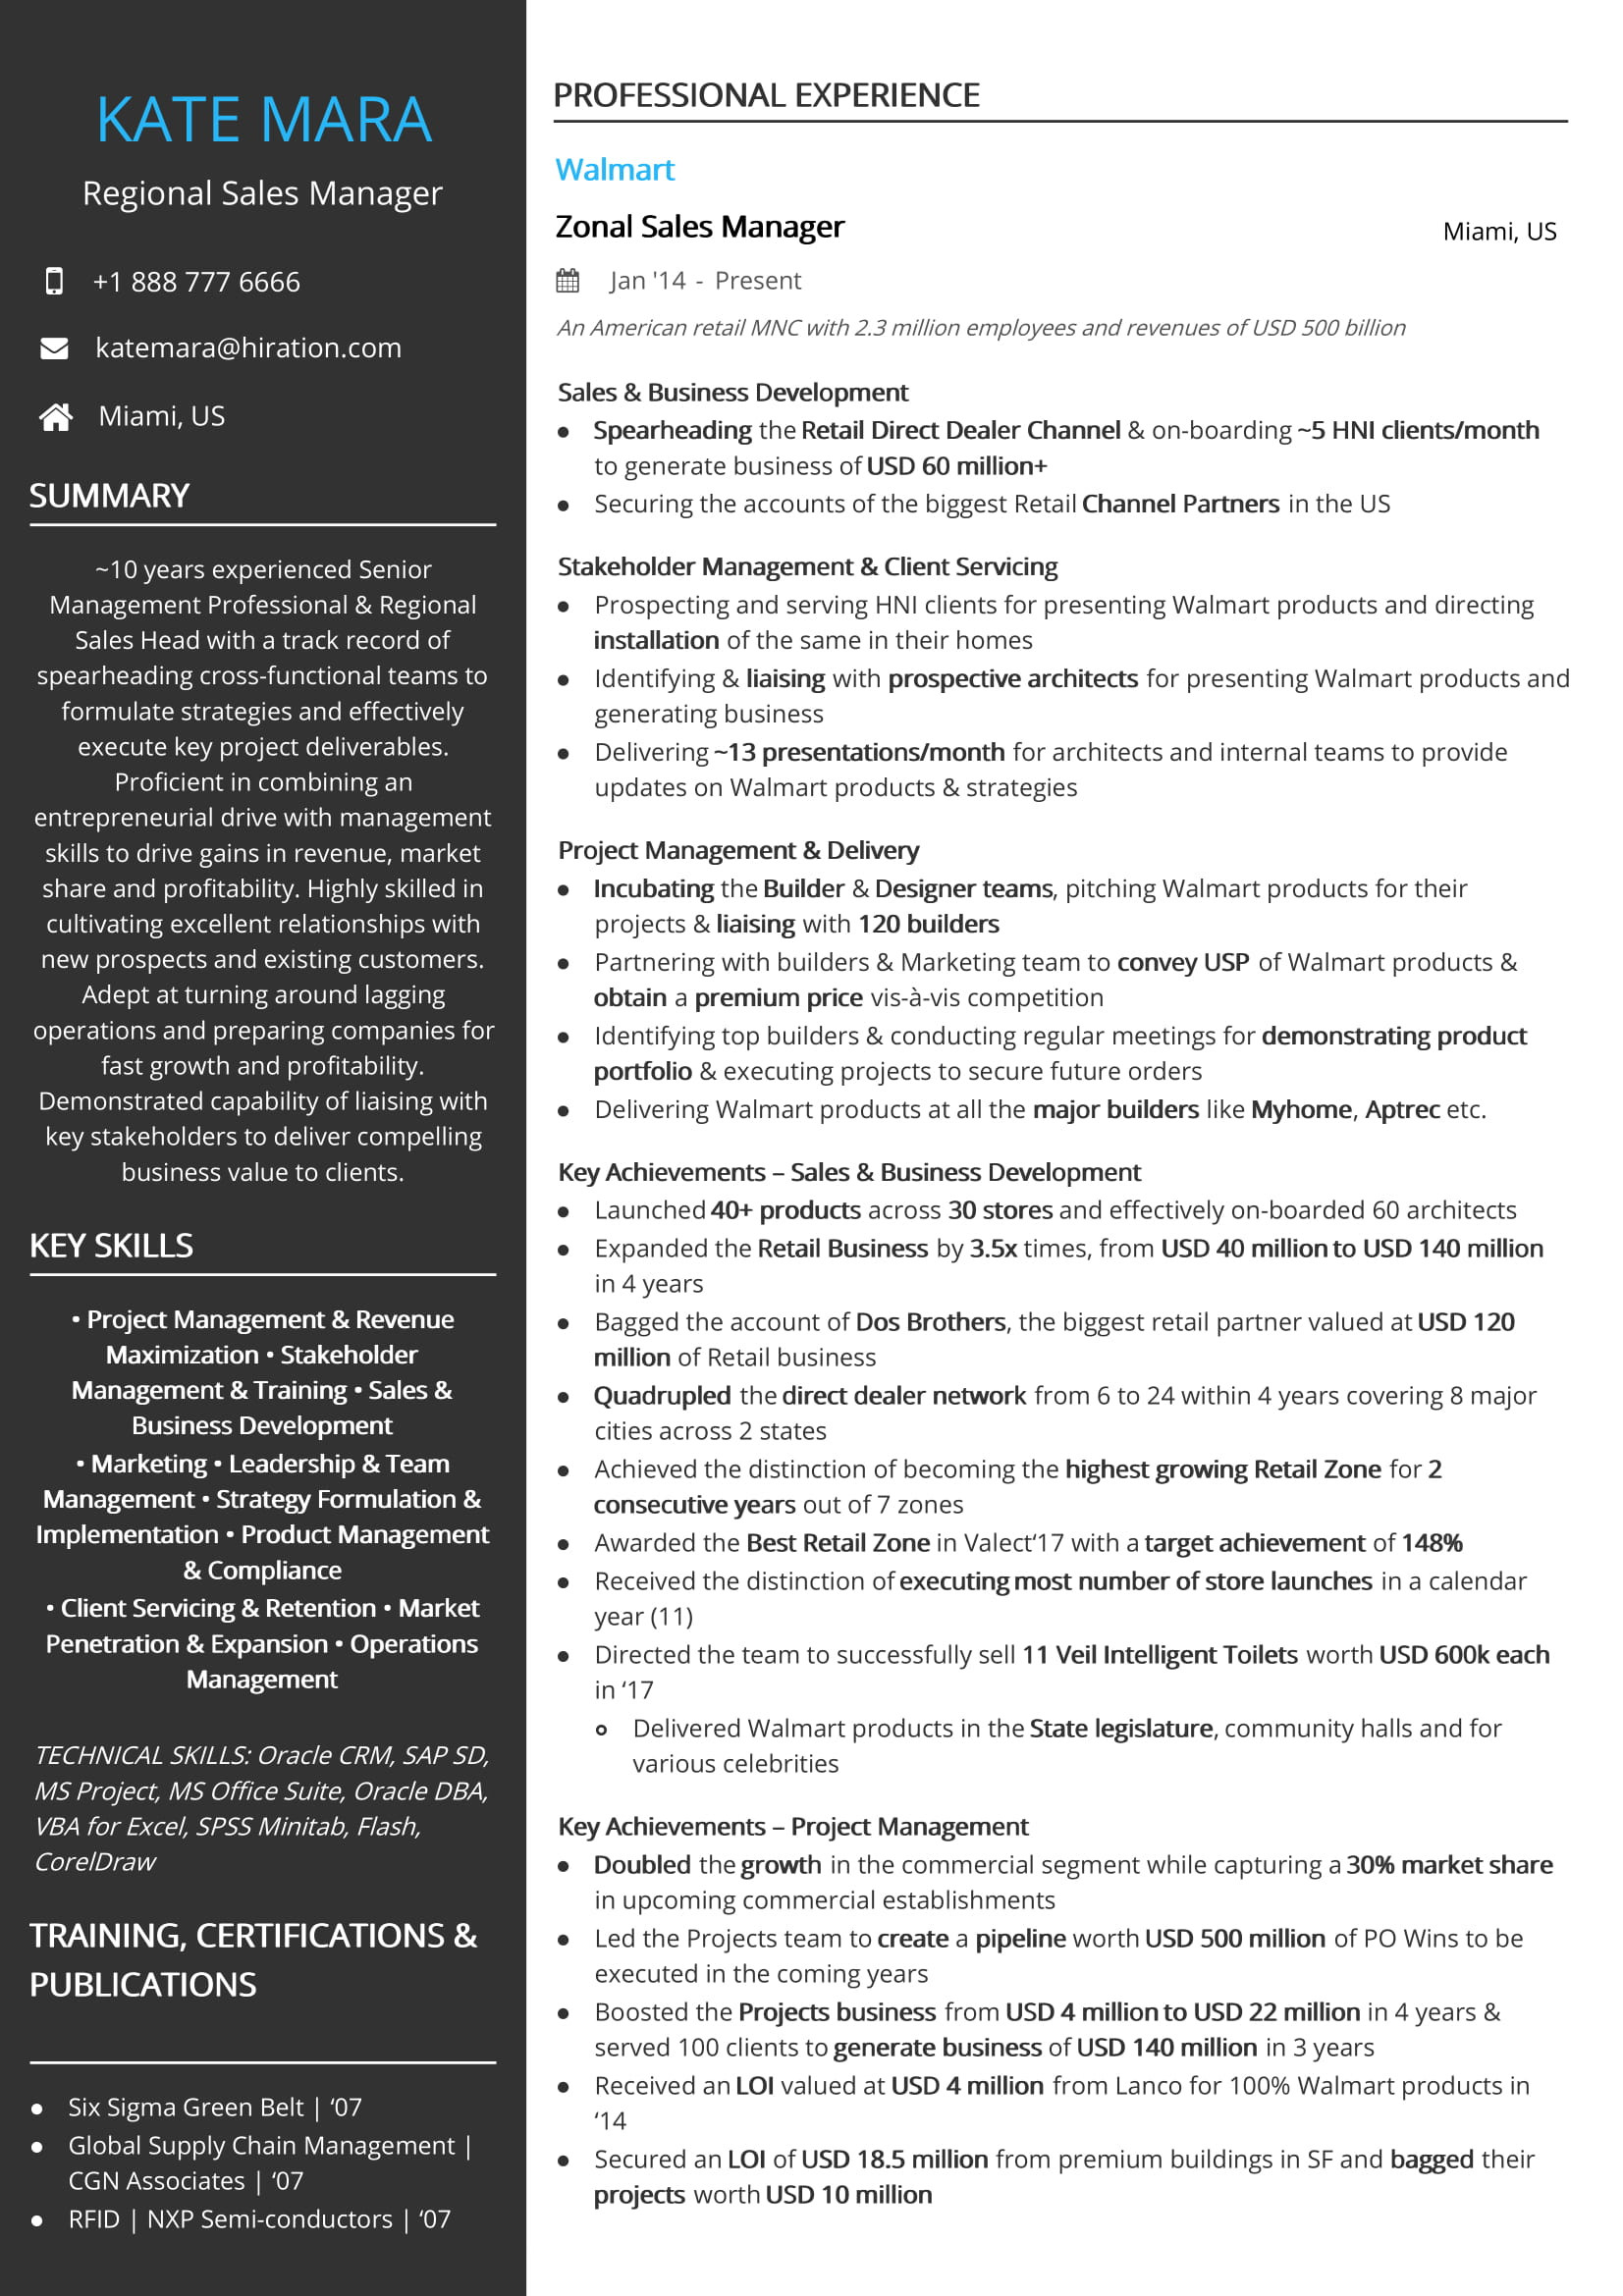 Sample Resume Of Fmcg Sales Executive Free Regional Sales Manager Resume Sample 2020 by Hiration